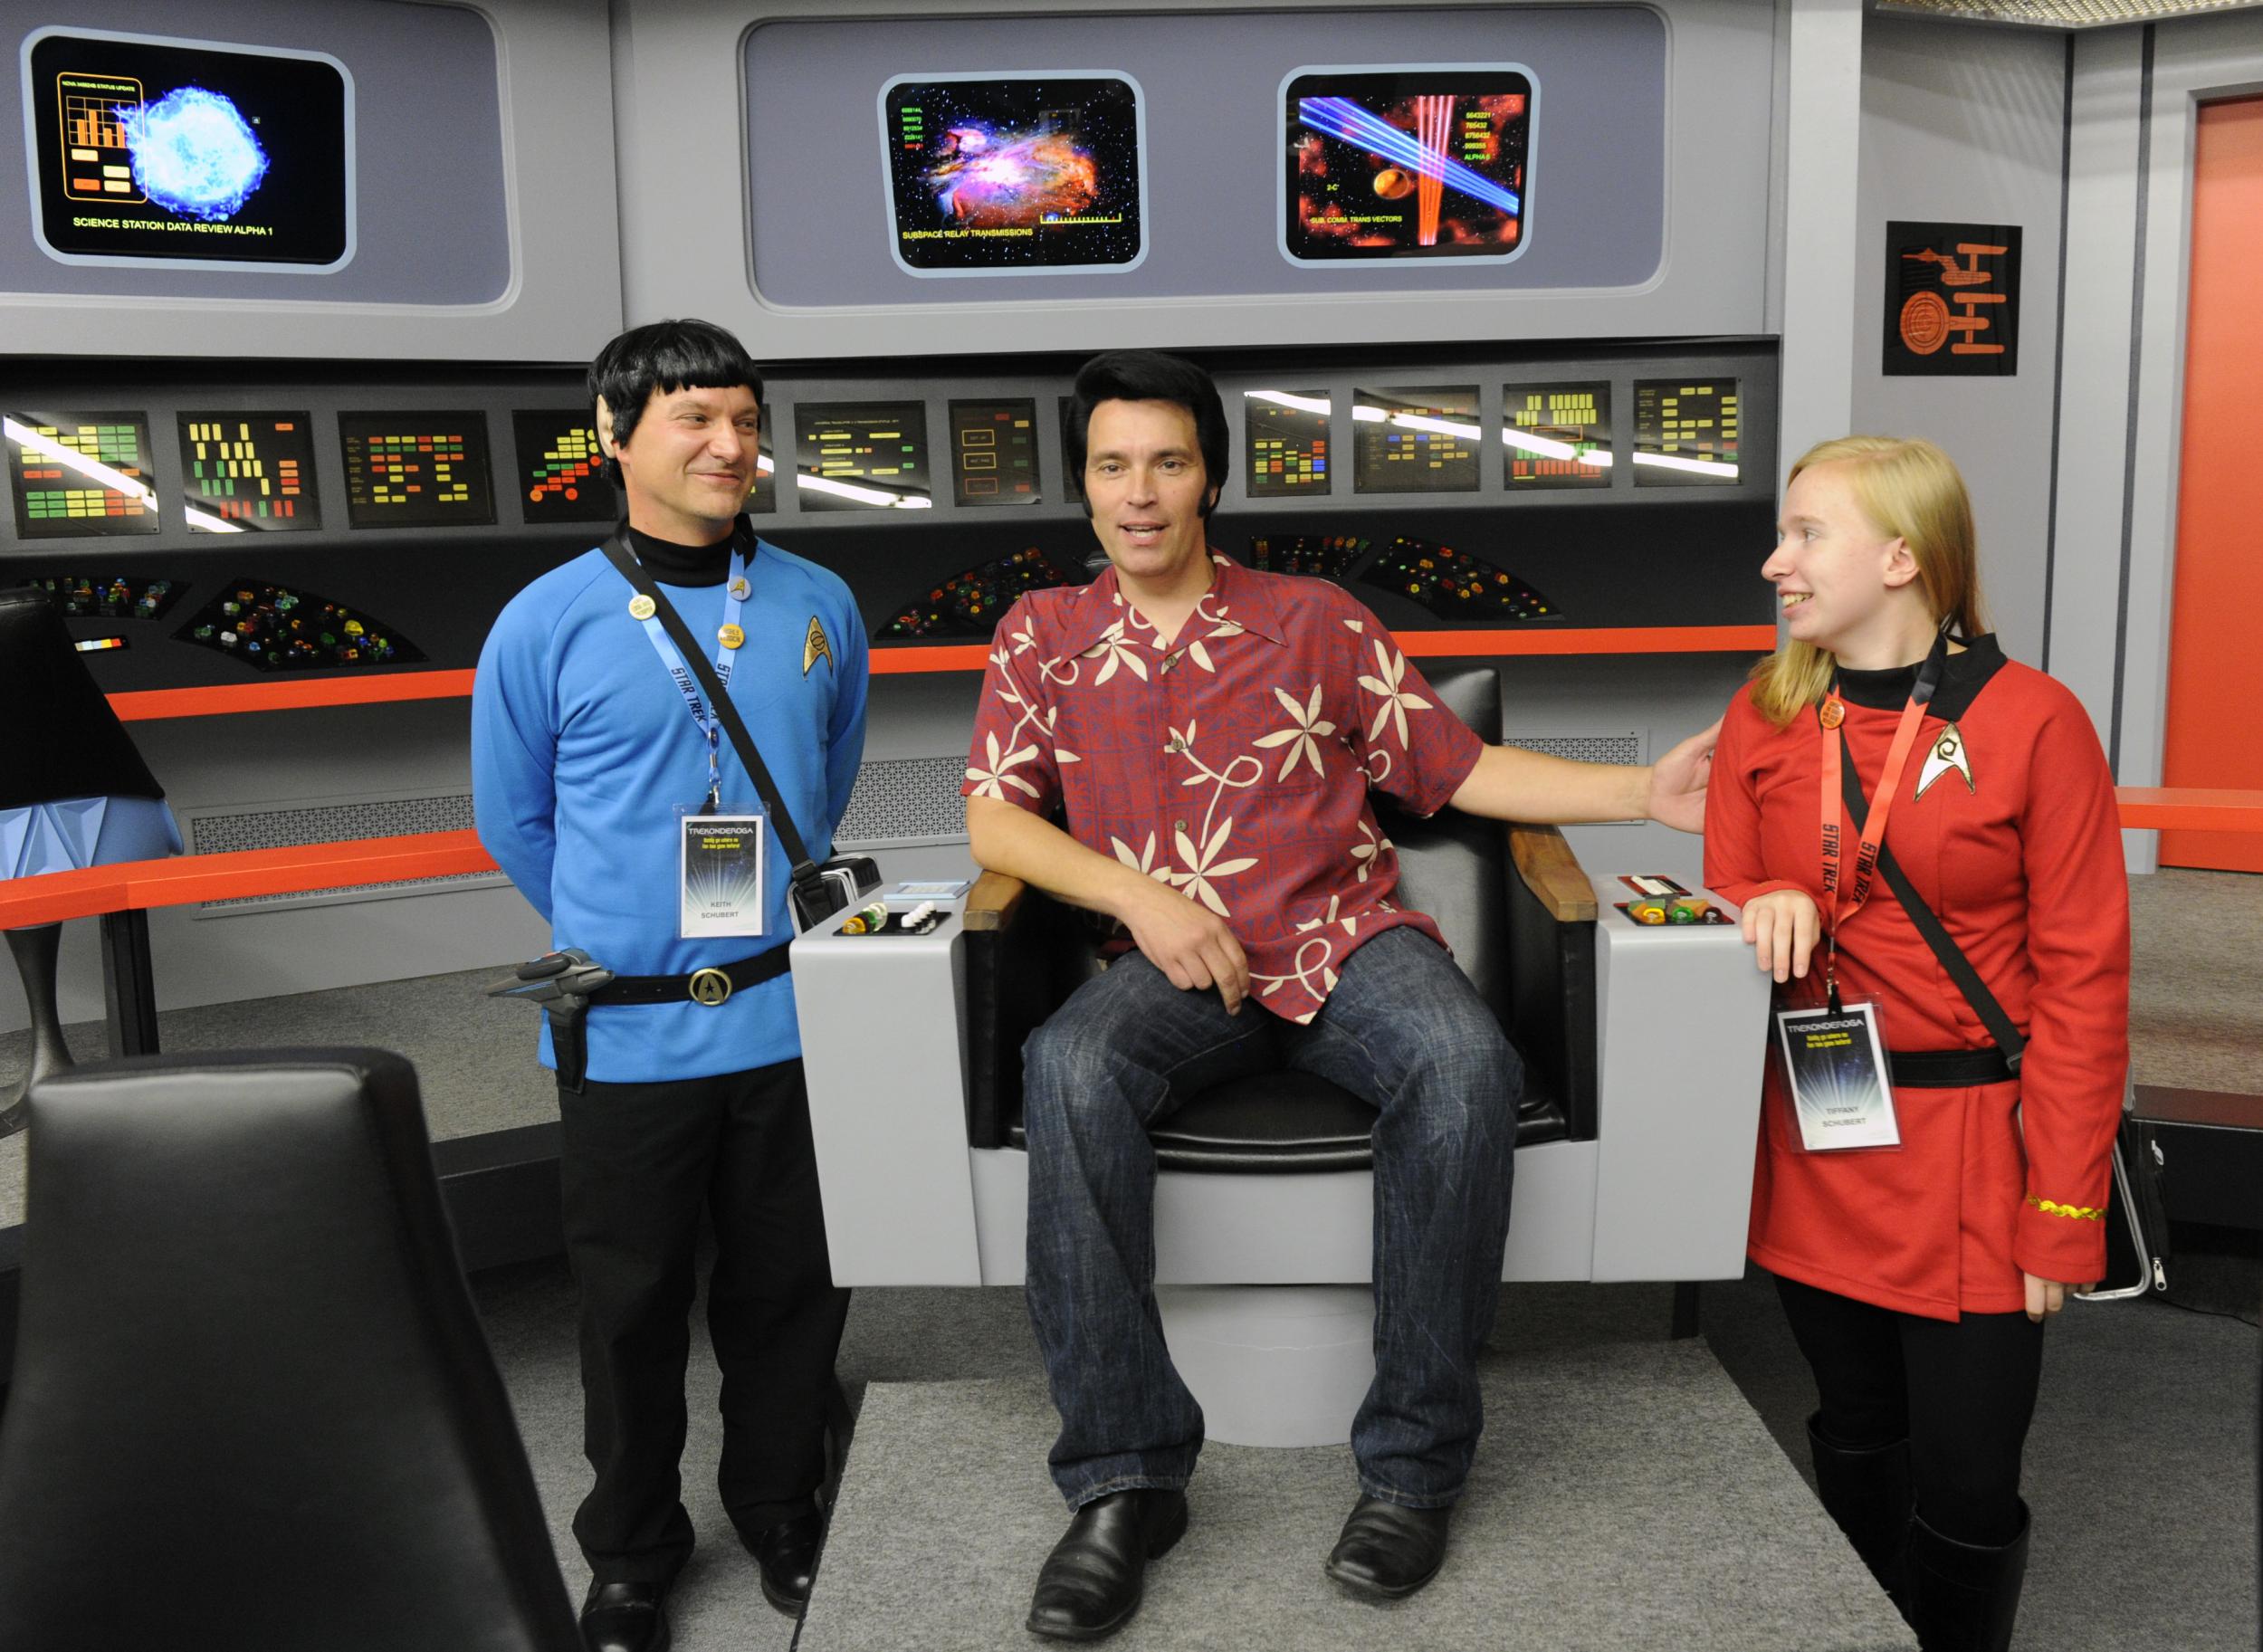 Keith Schubert dressed as Star Trek’s Mr Spock, and his daughter Tiffany Schubert, right, talk with James Cawley during a tour of his replica starship Enterprise from the original Star Trek series